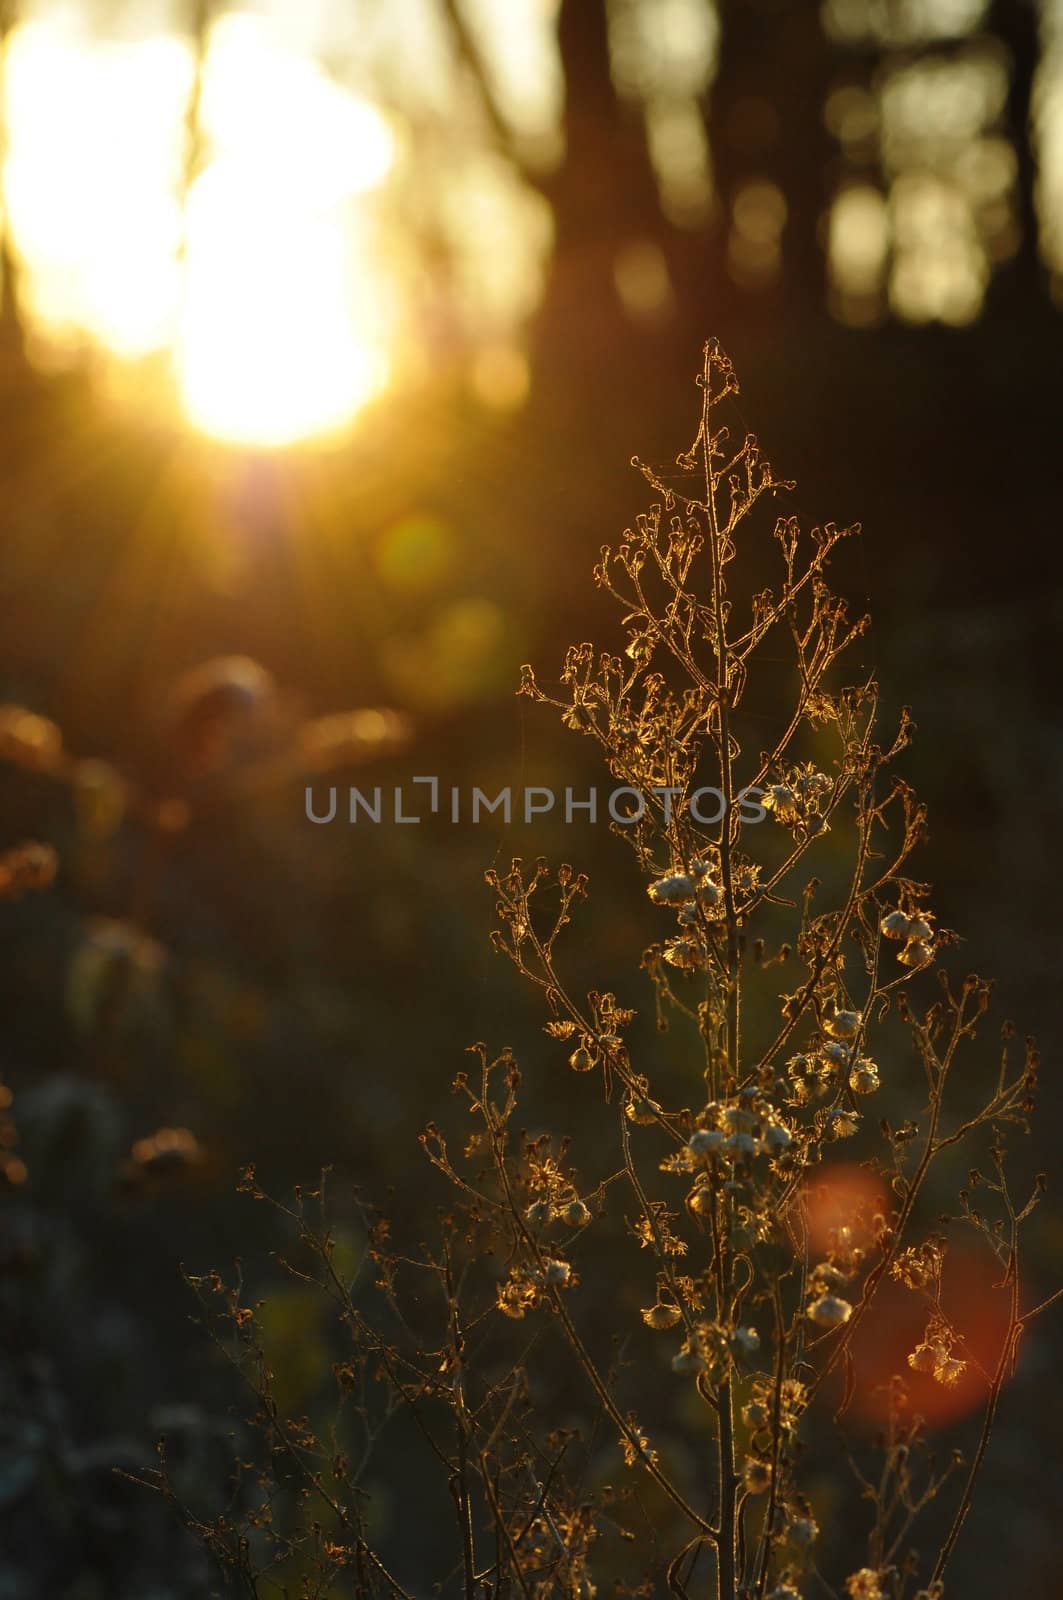 Morning Sunlight through Thin Branches of a Plant by shkyo30